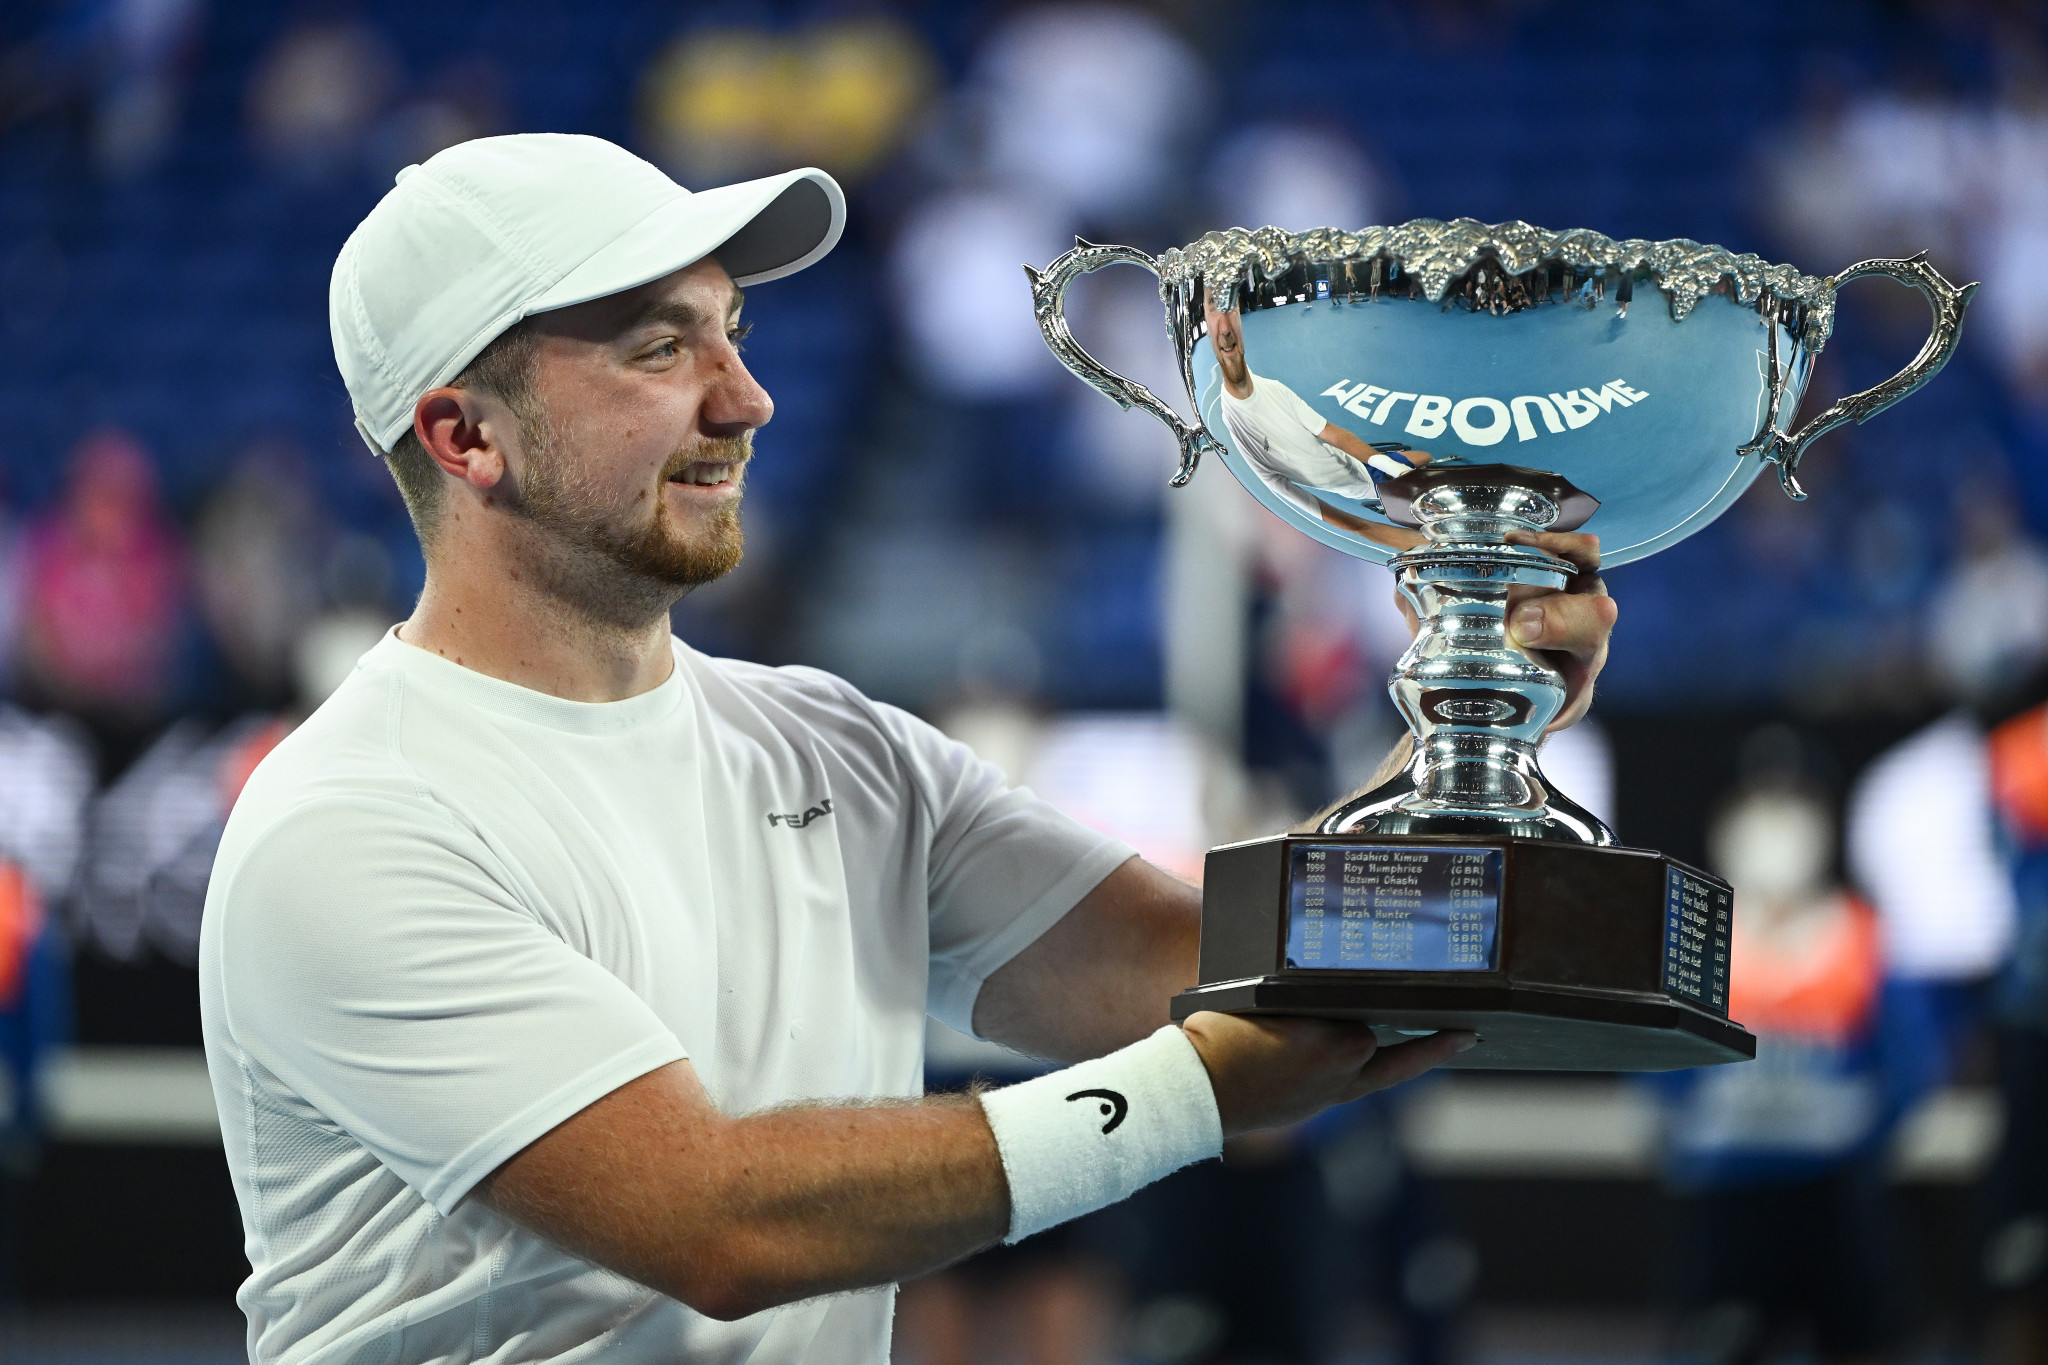 Schröder won his first Australian Open quad singles title by winning 7-5, 6-0 ©Getty Images